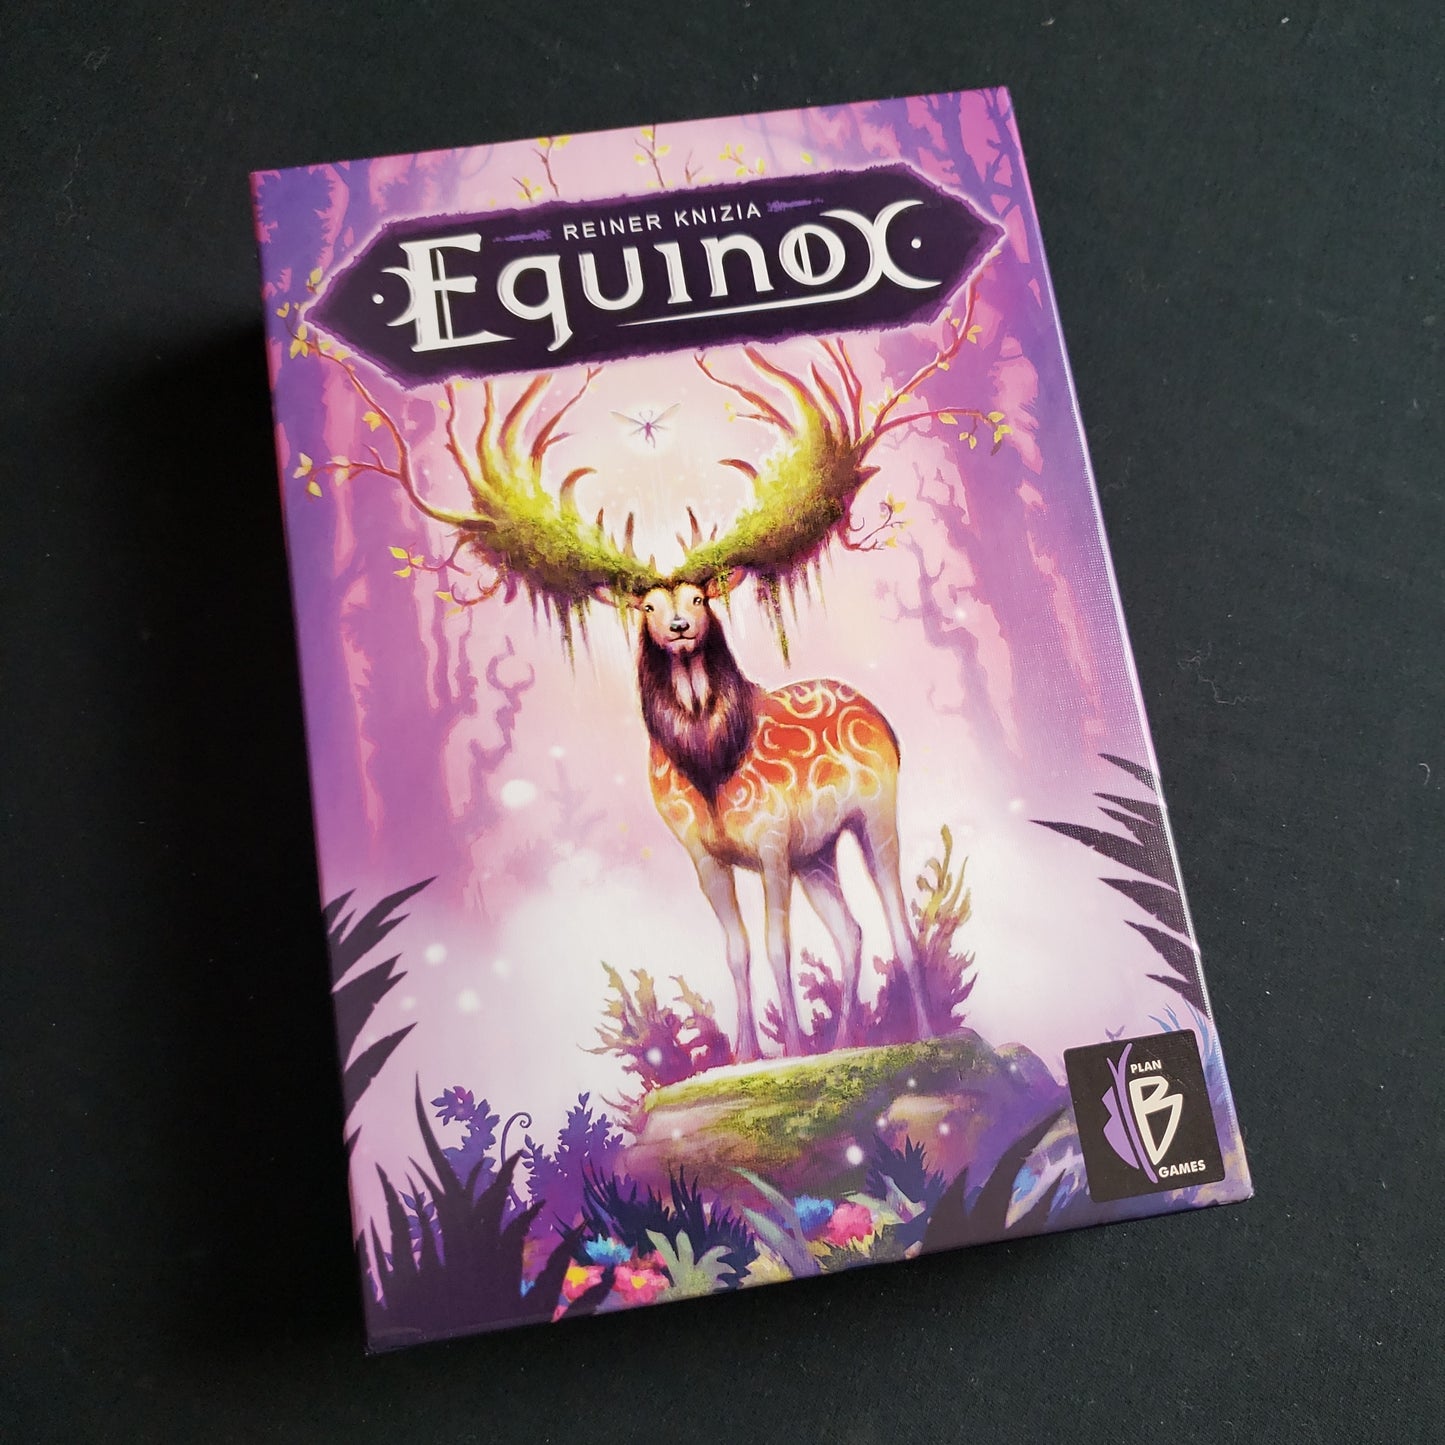 Image shows the front cover of the box of the Equinox board game